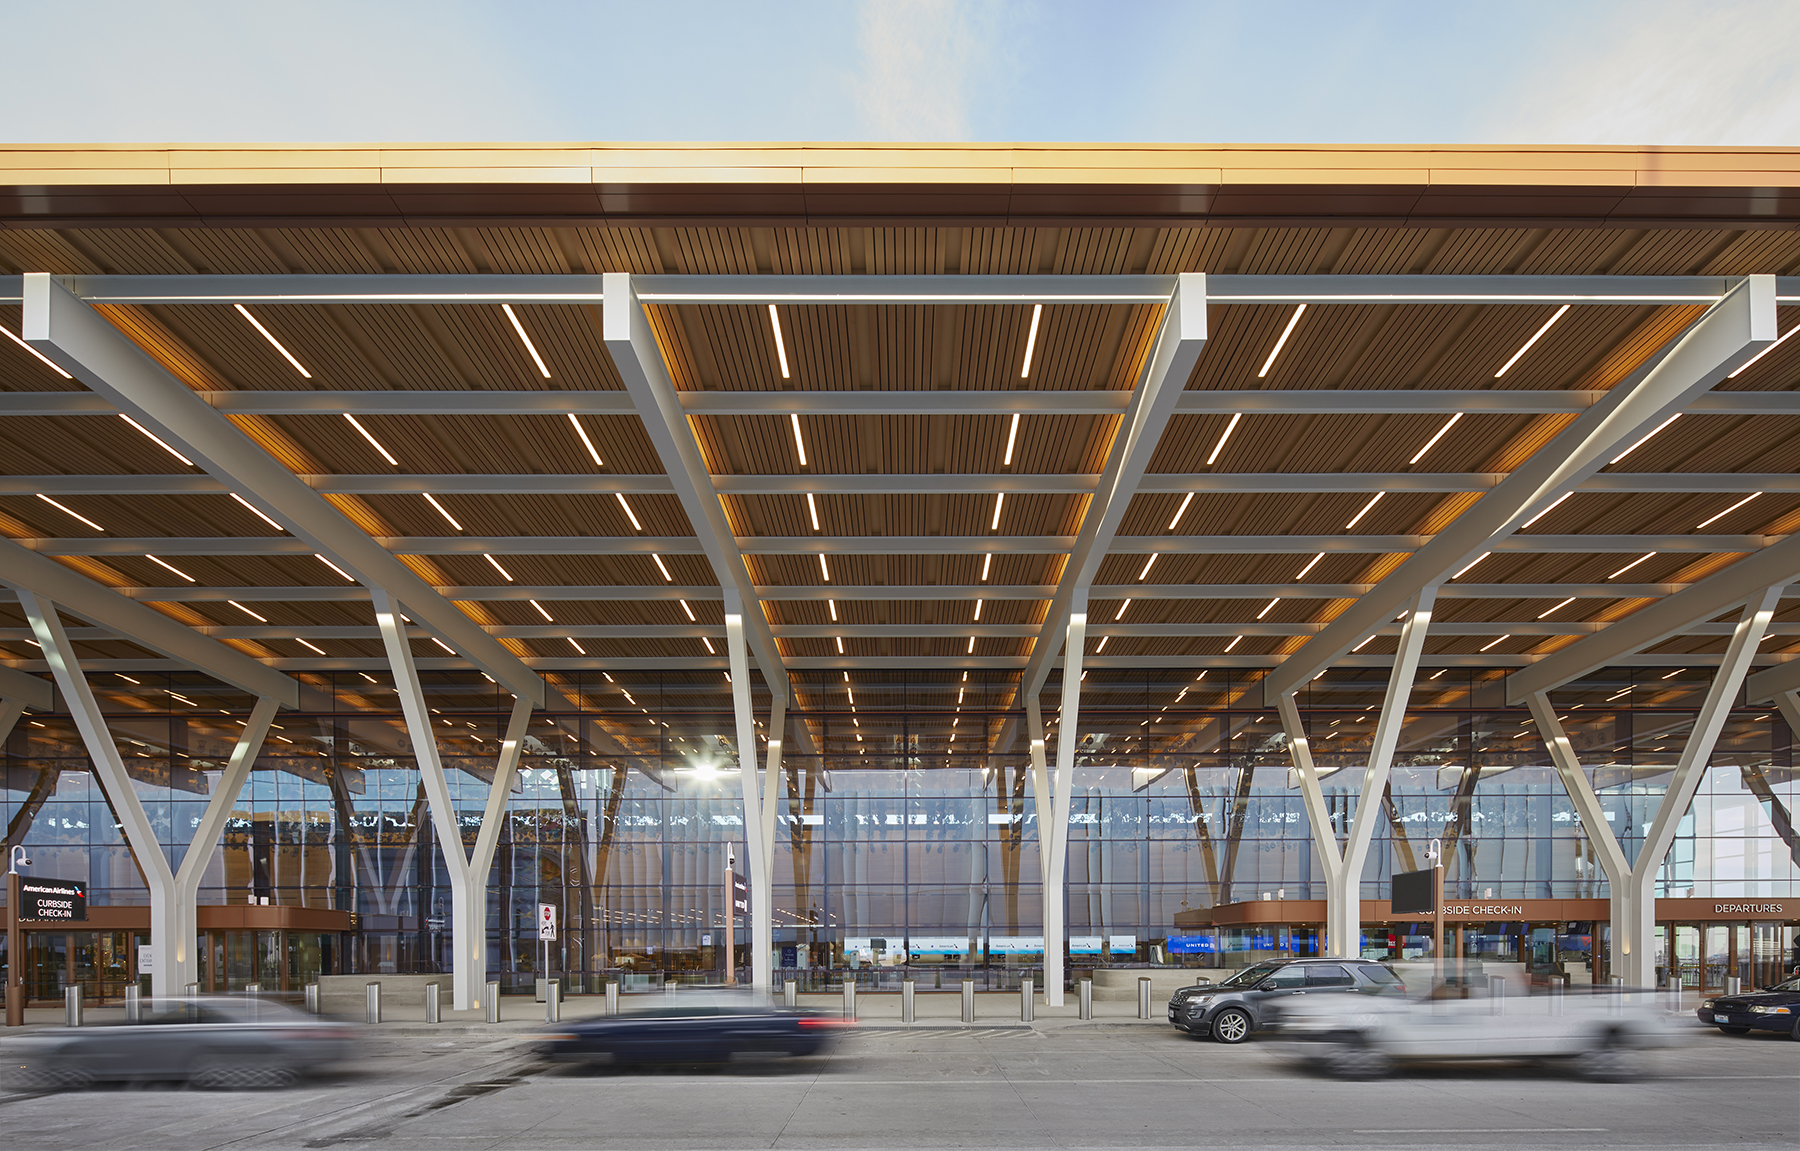 The new, $1.5 billion terminal building at Kansas City International Airport, which opened this year, replaces an outdated 1972 design with dramatically expanded spaces and a structurally expressive design. (Image courtesy of Lucas Blair Simpson/© SOM)